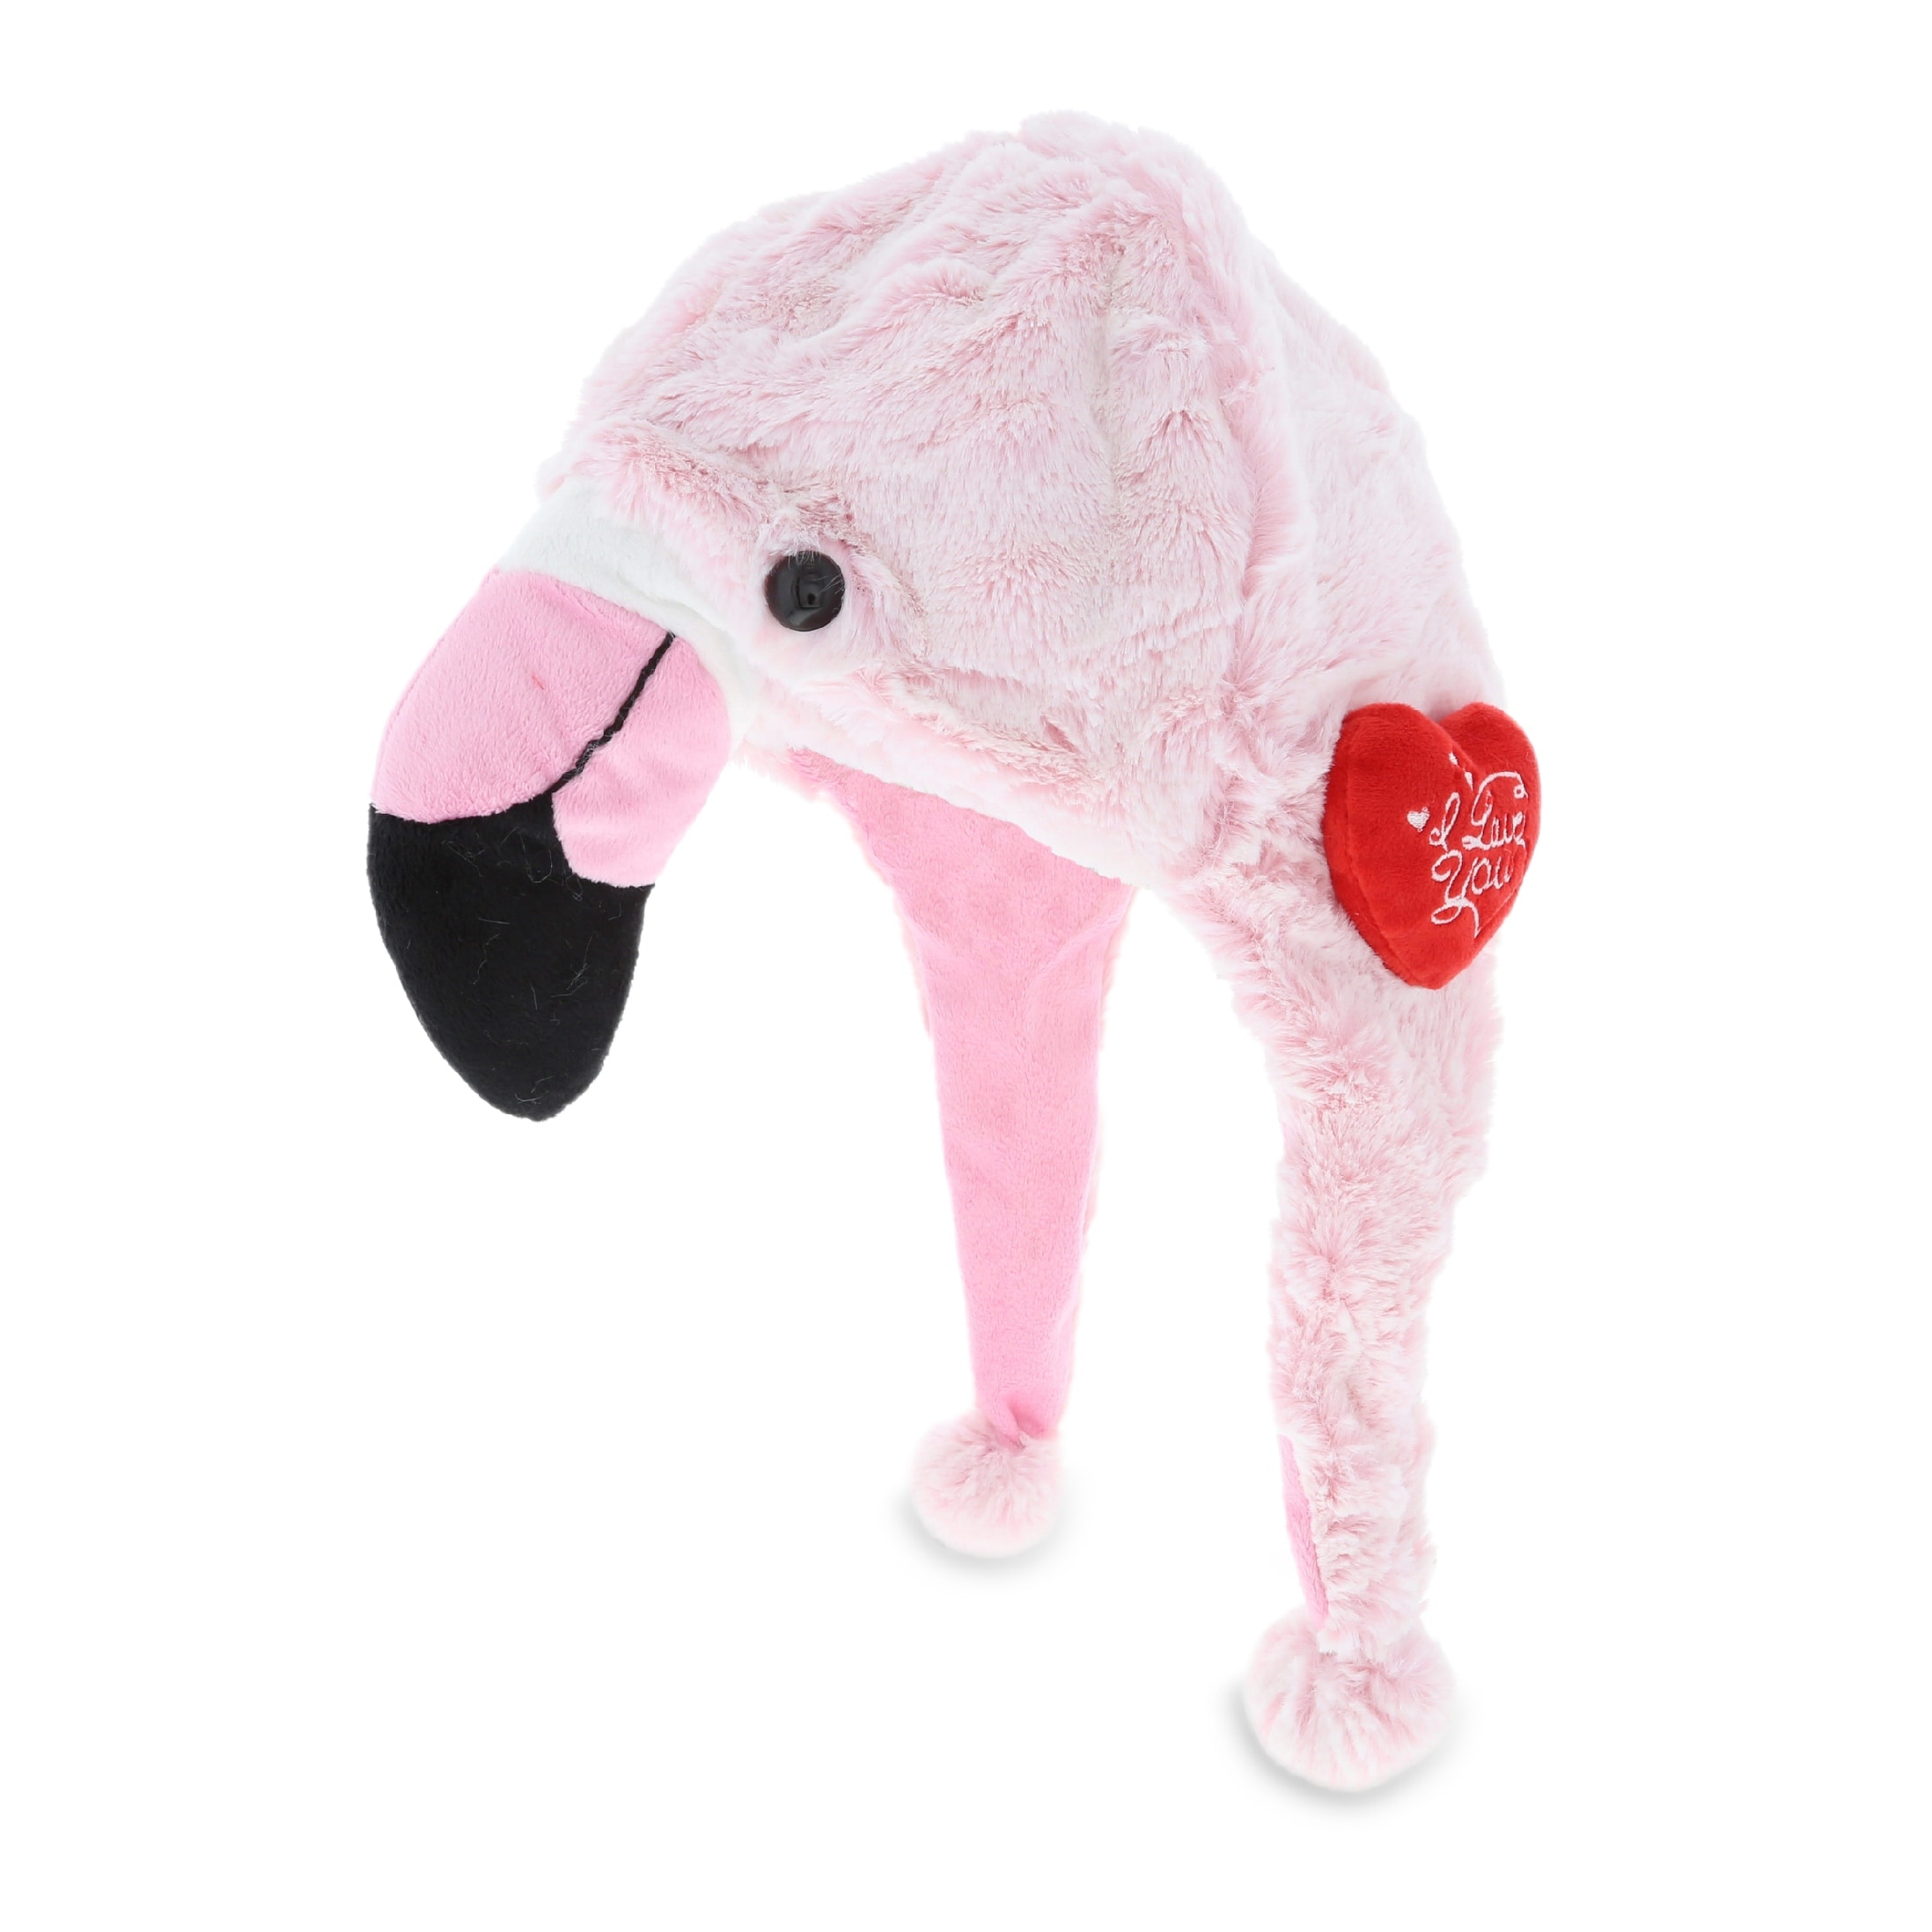 DolliBu I LOVE YOU Super Soft Plush Flamingo Hat with Red Heart - 16 inches long